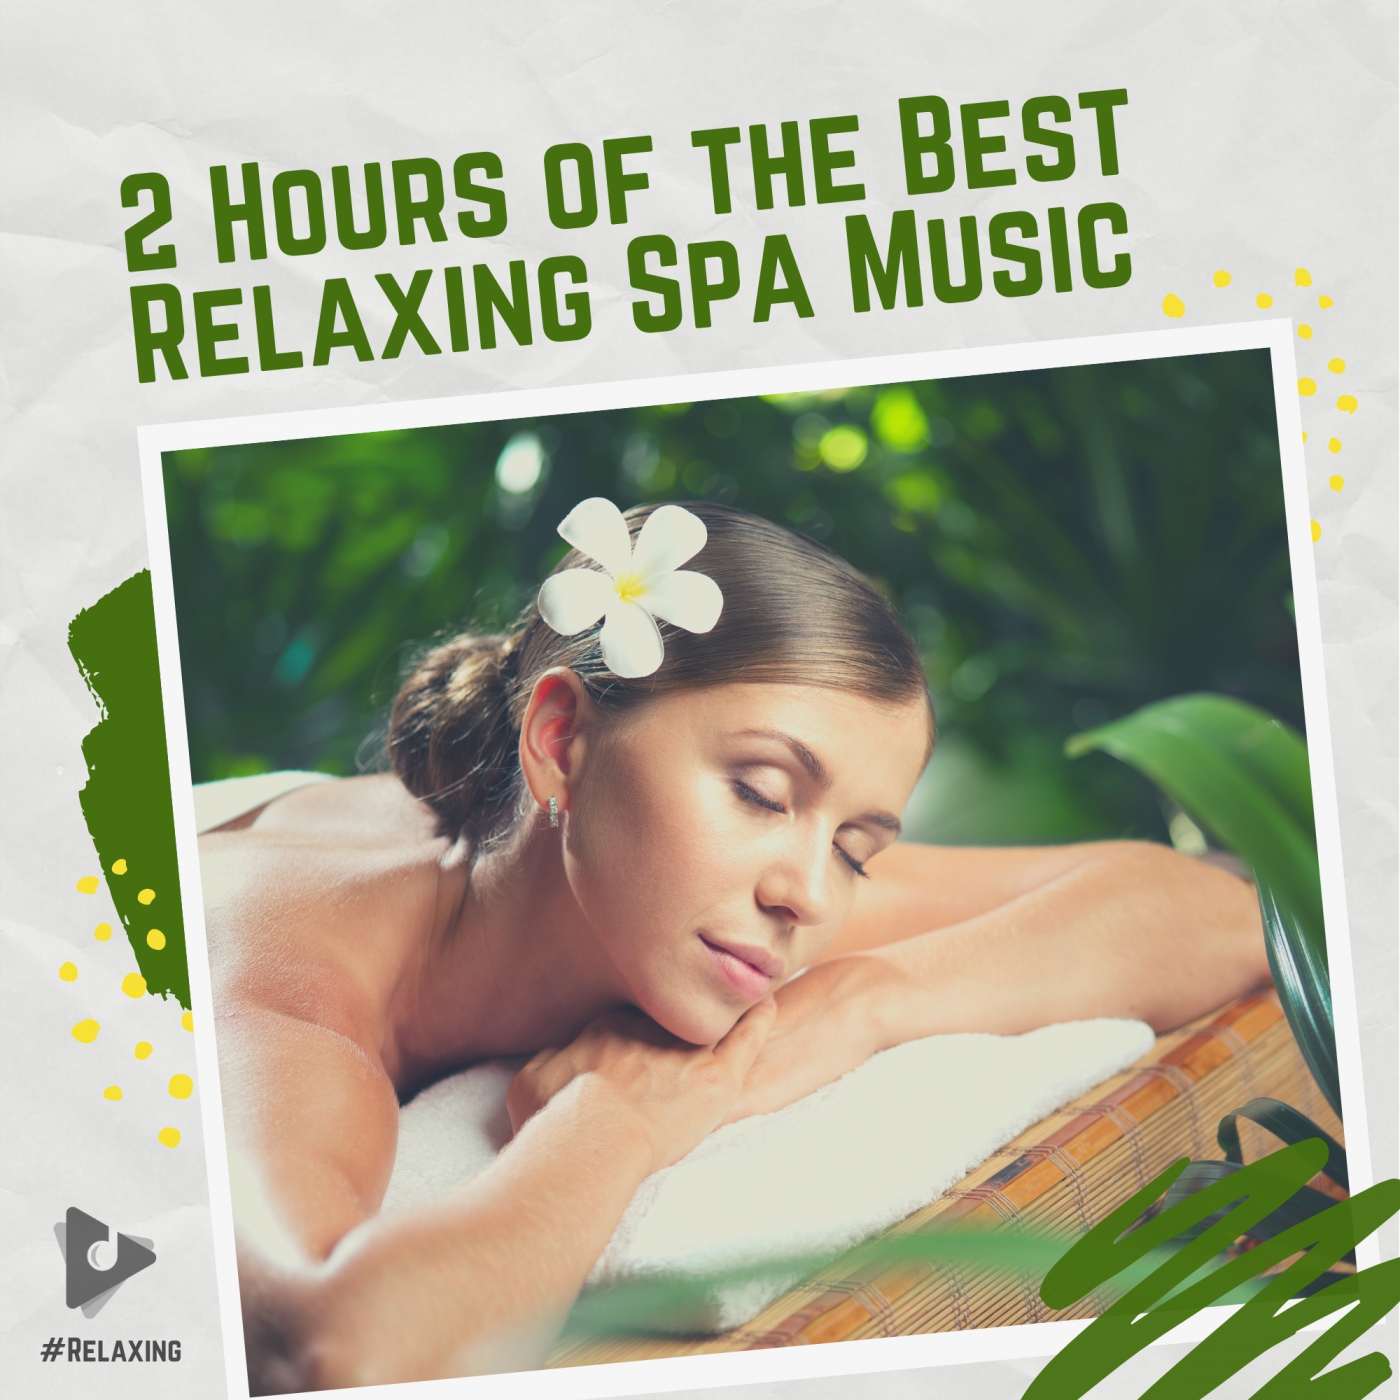 2 Hours of The Best Relaxing Spa Music